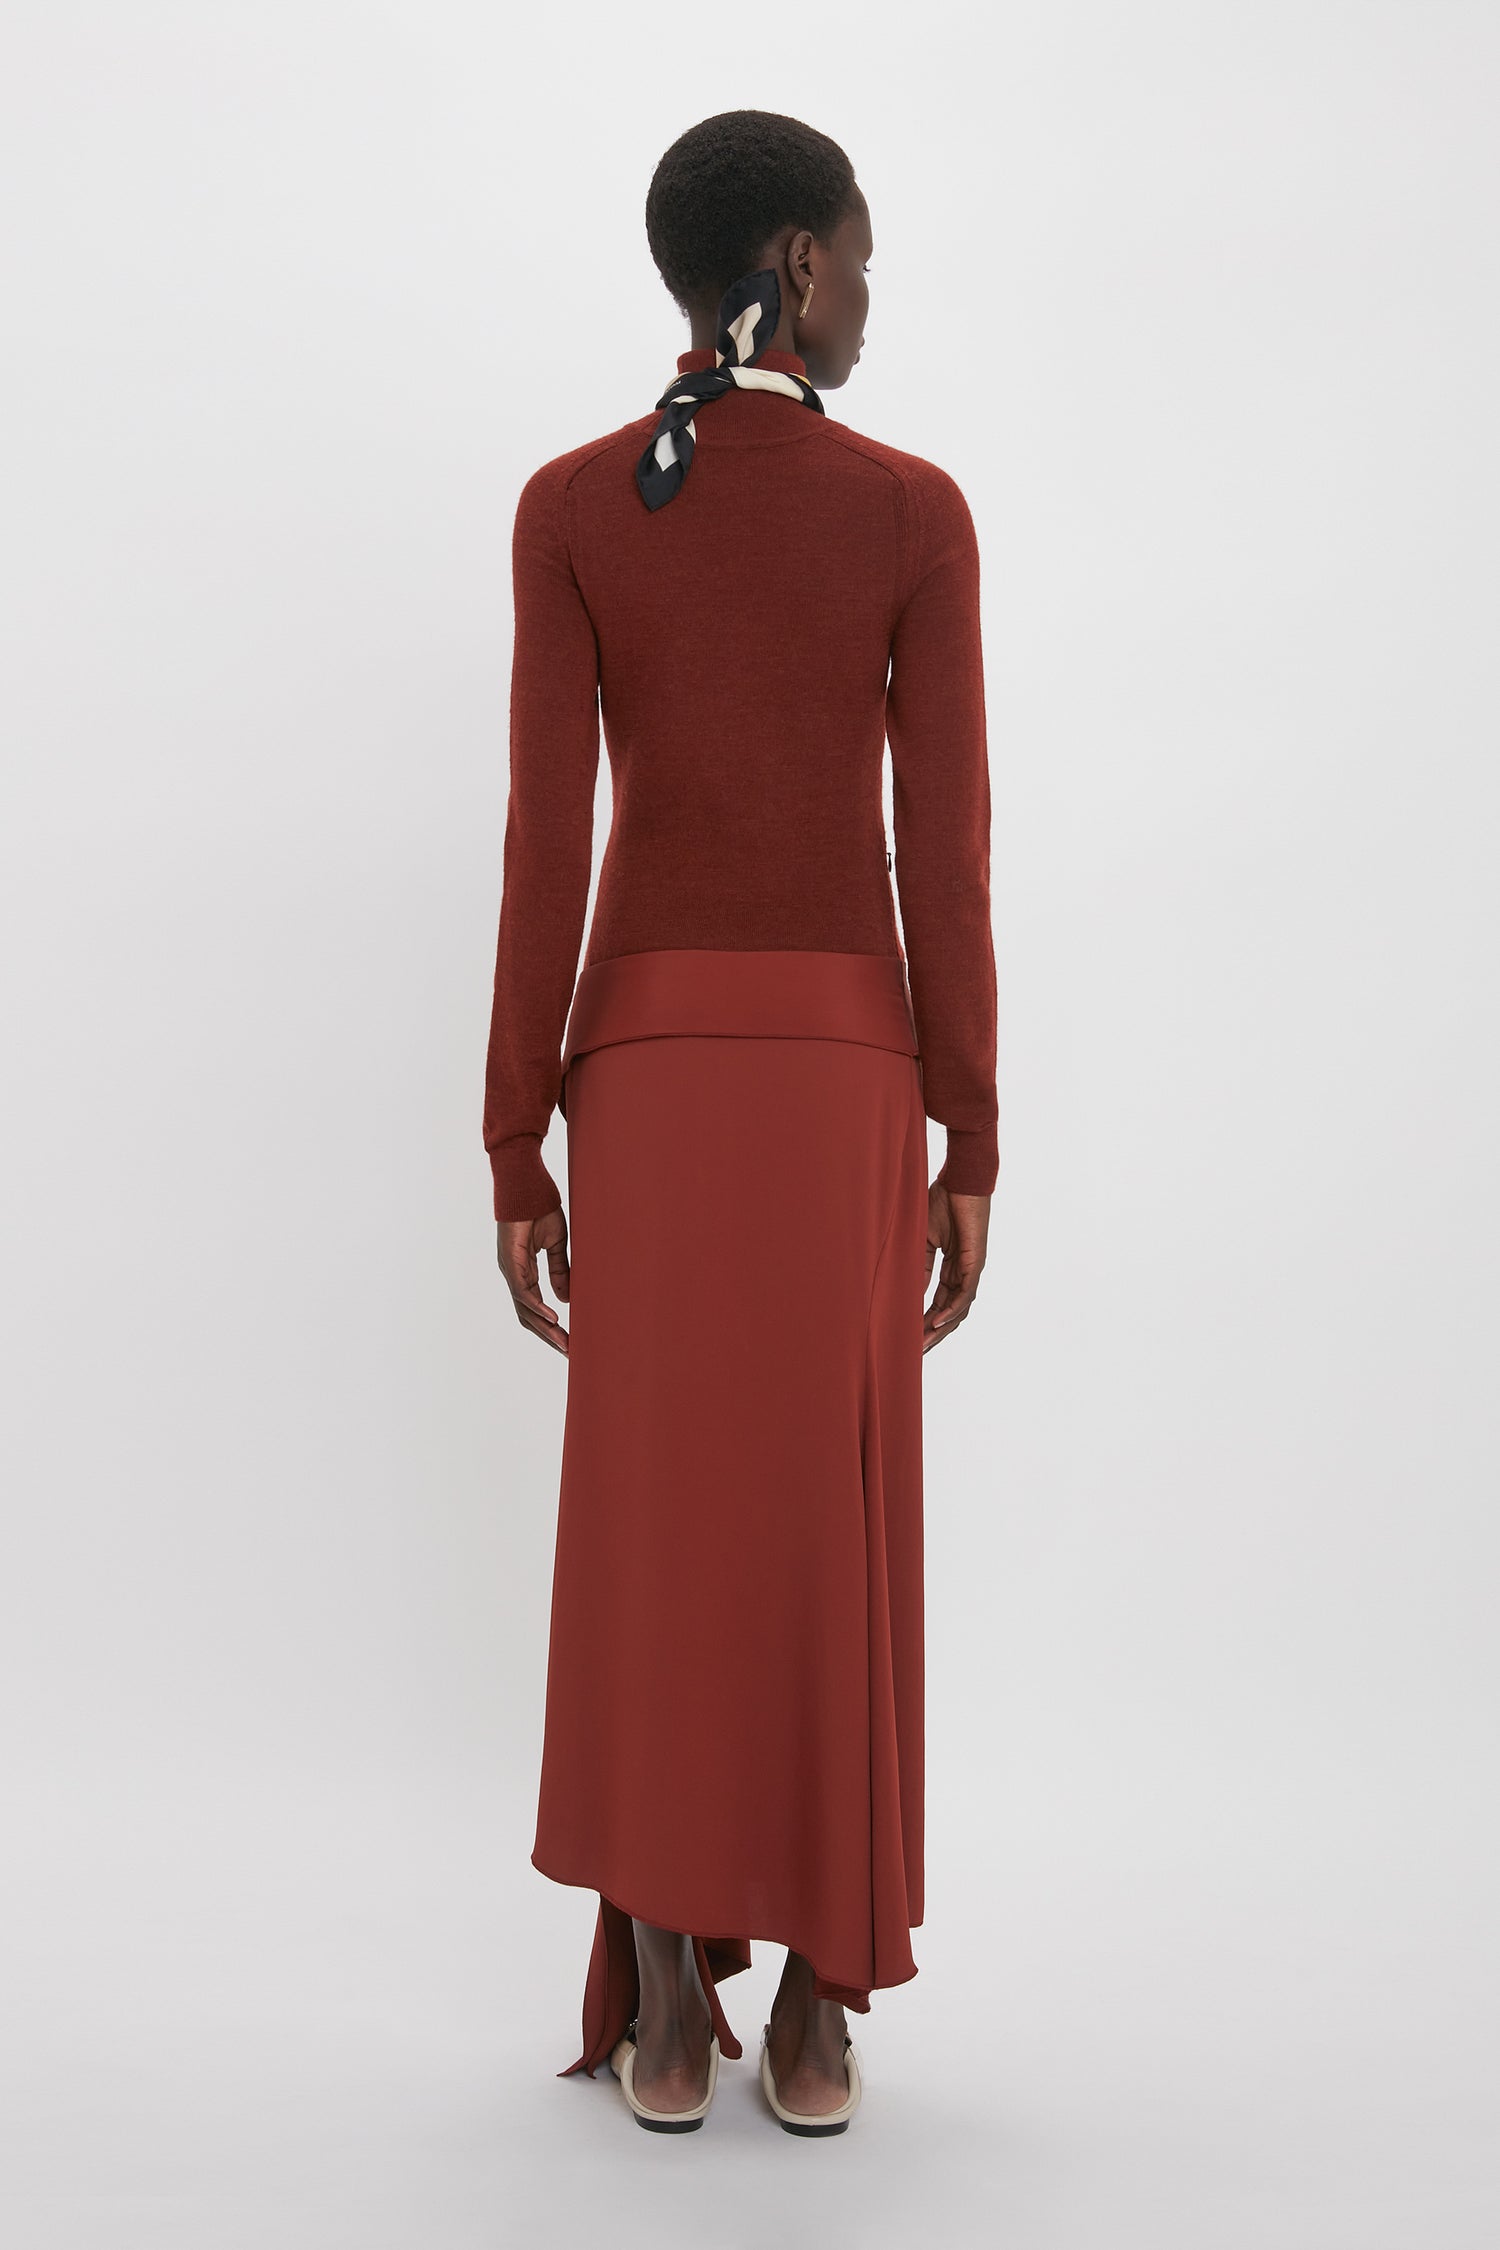 A person wearing a long-sleeve red top and a matching long skirt, reminiscent of Victoria Beckham's High Neck Tie Detail Dress In Russet collection, stands facing away from the camera against a plain background.